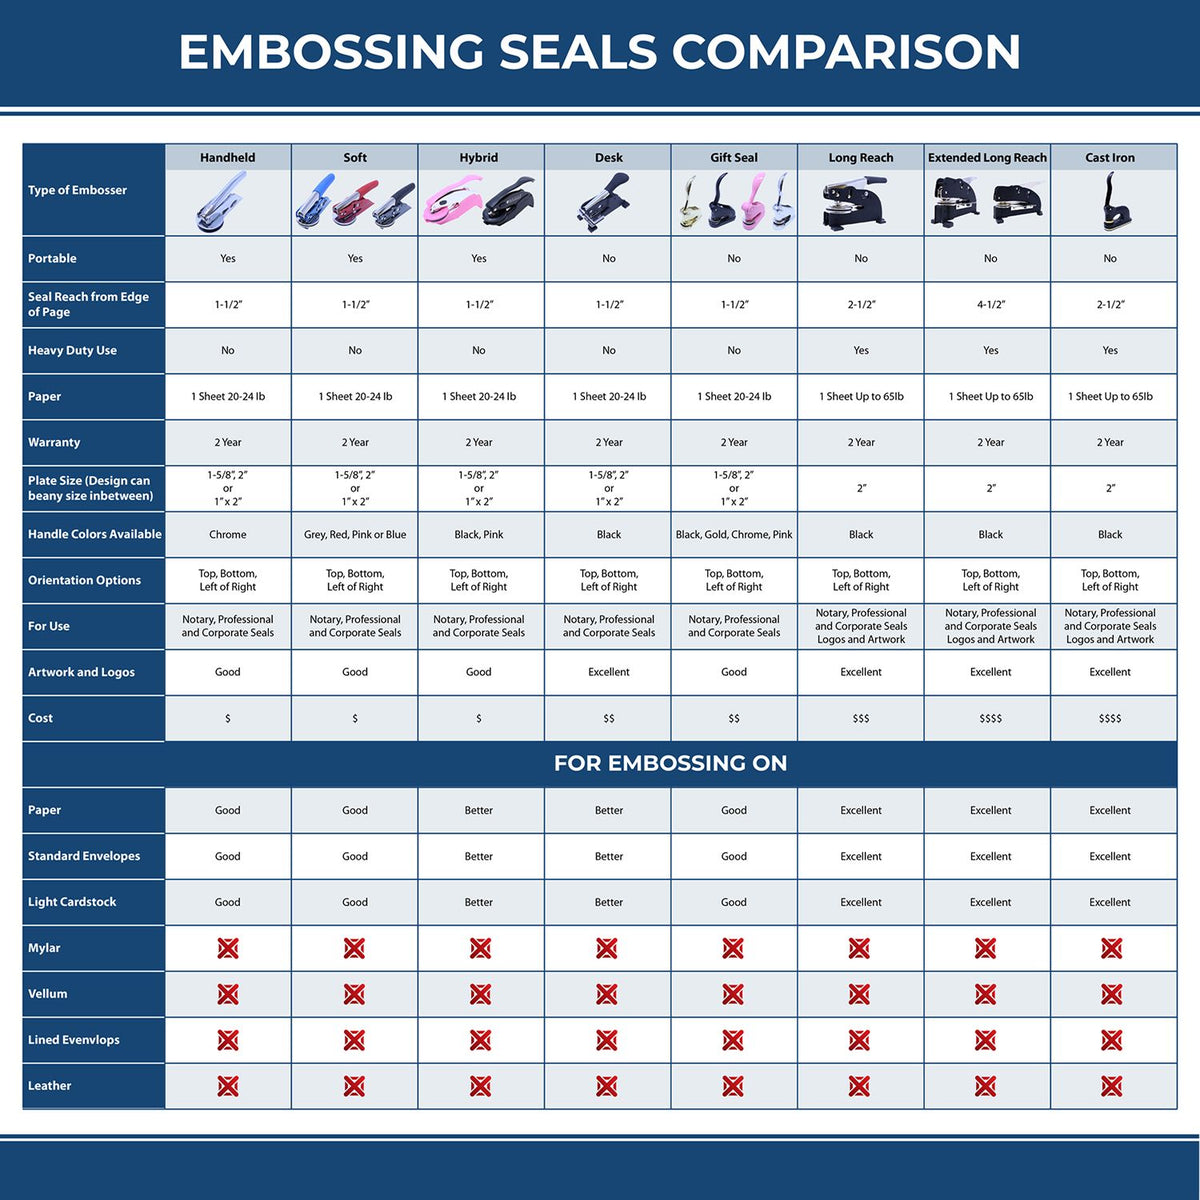 A comparison chart for the different types of mount models available for the State of New Jersey Extended Long Reach Engineer Seal.